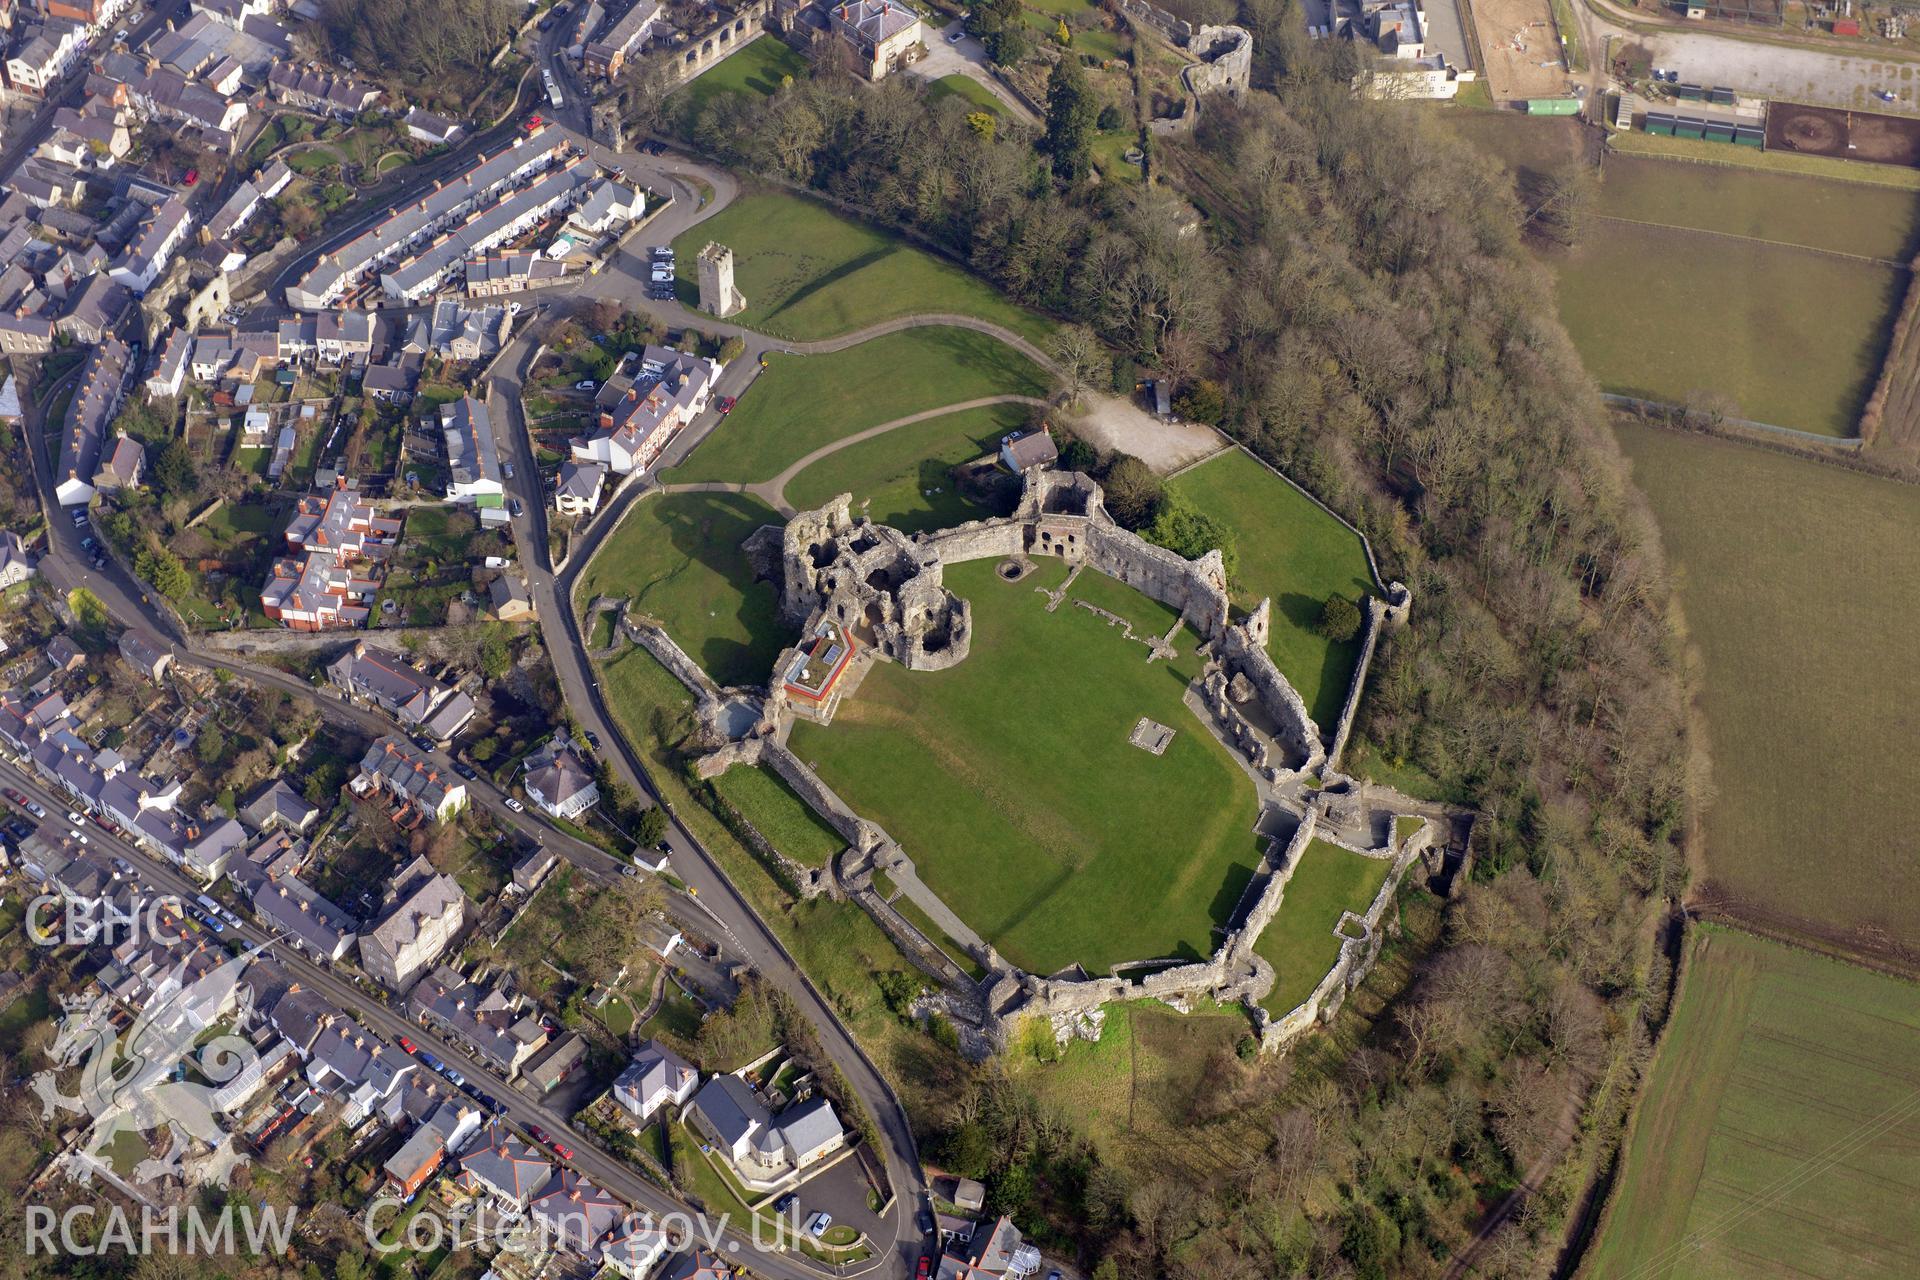 Denbigh Castle, the Cadw visitor's centre at the castle and the surviving tower of St. Hilary's chapel, Denbigh. Oblique aerial photograph taken during the Royal Commission?s programme of archaeological aerial reconnaissance by Toby Driver on 28th February 2013.